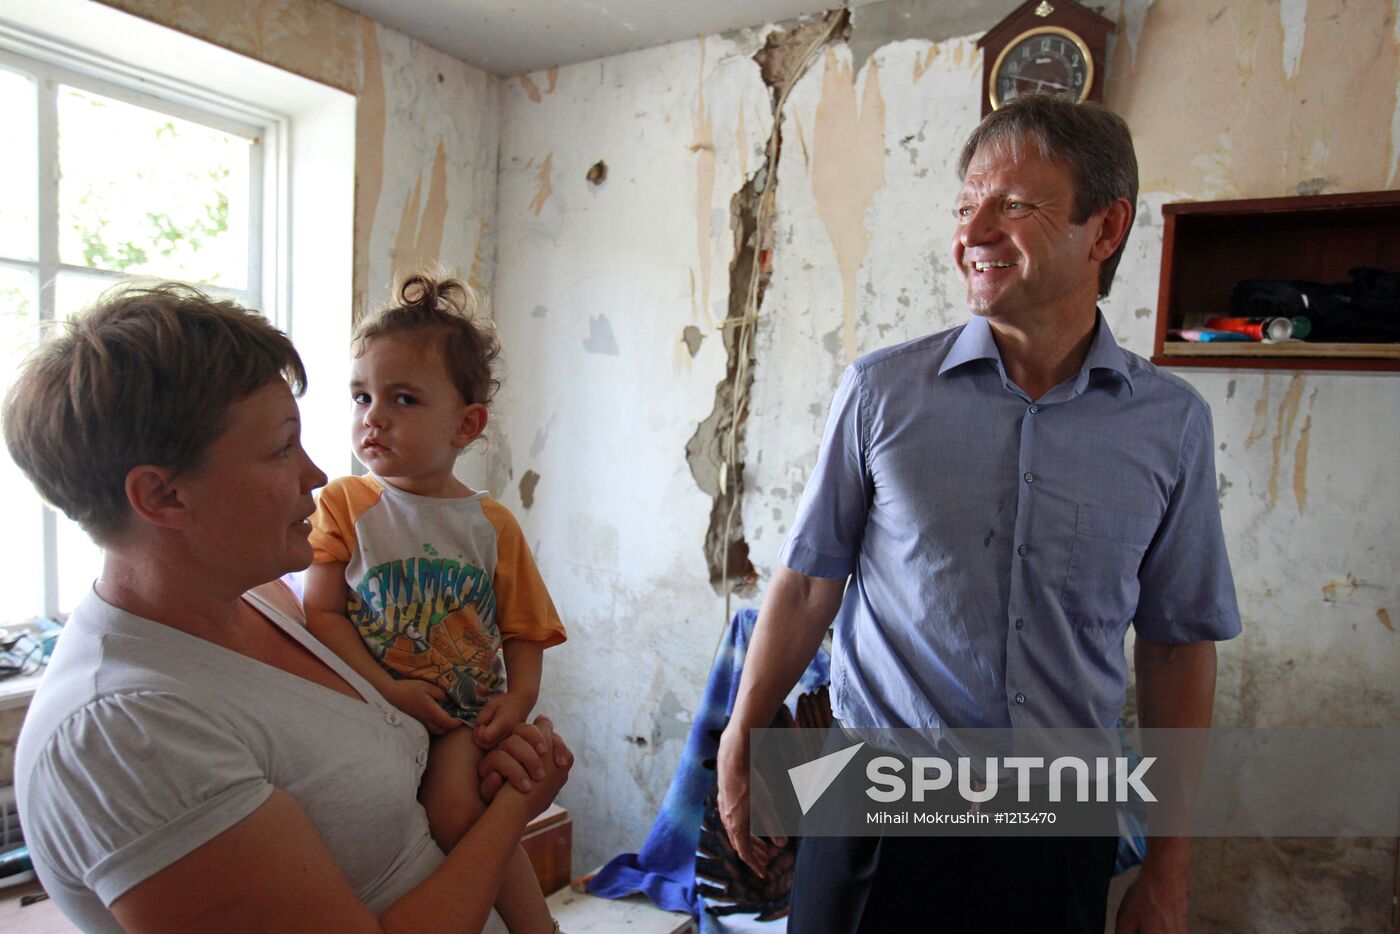 Russia marks 40 days since Krymsk disastrous floods